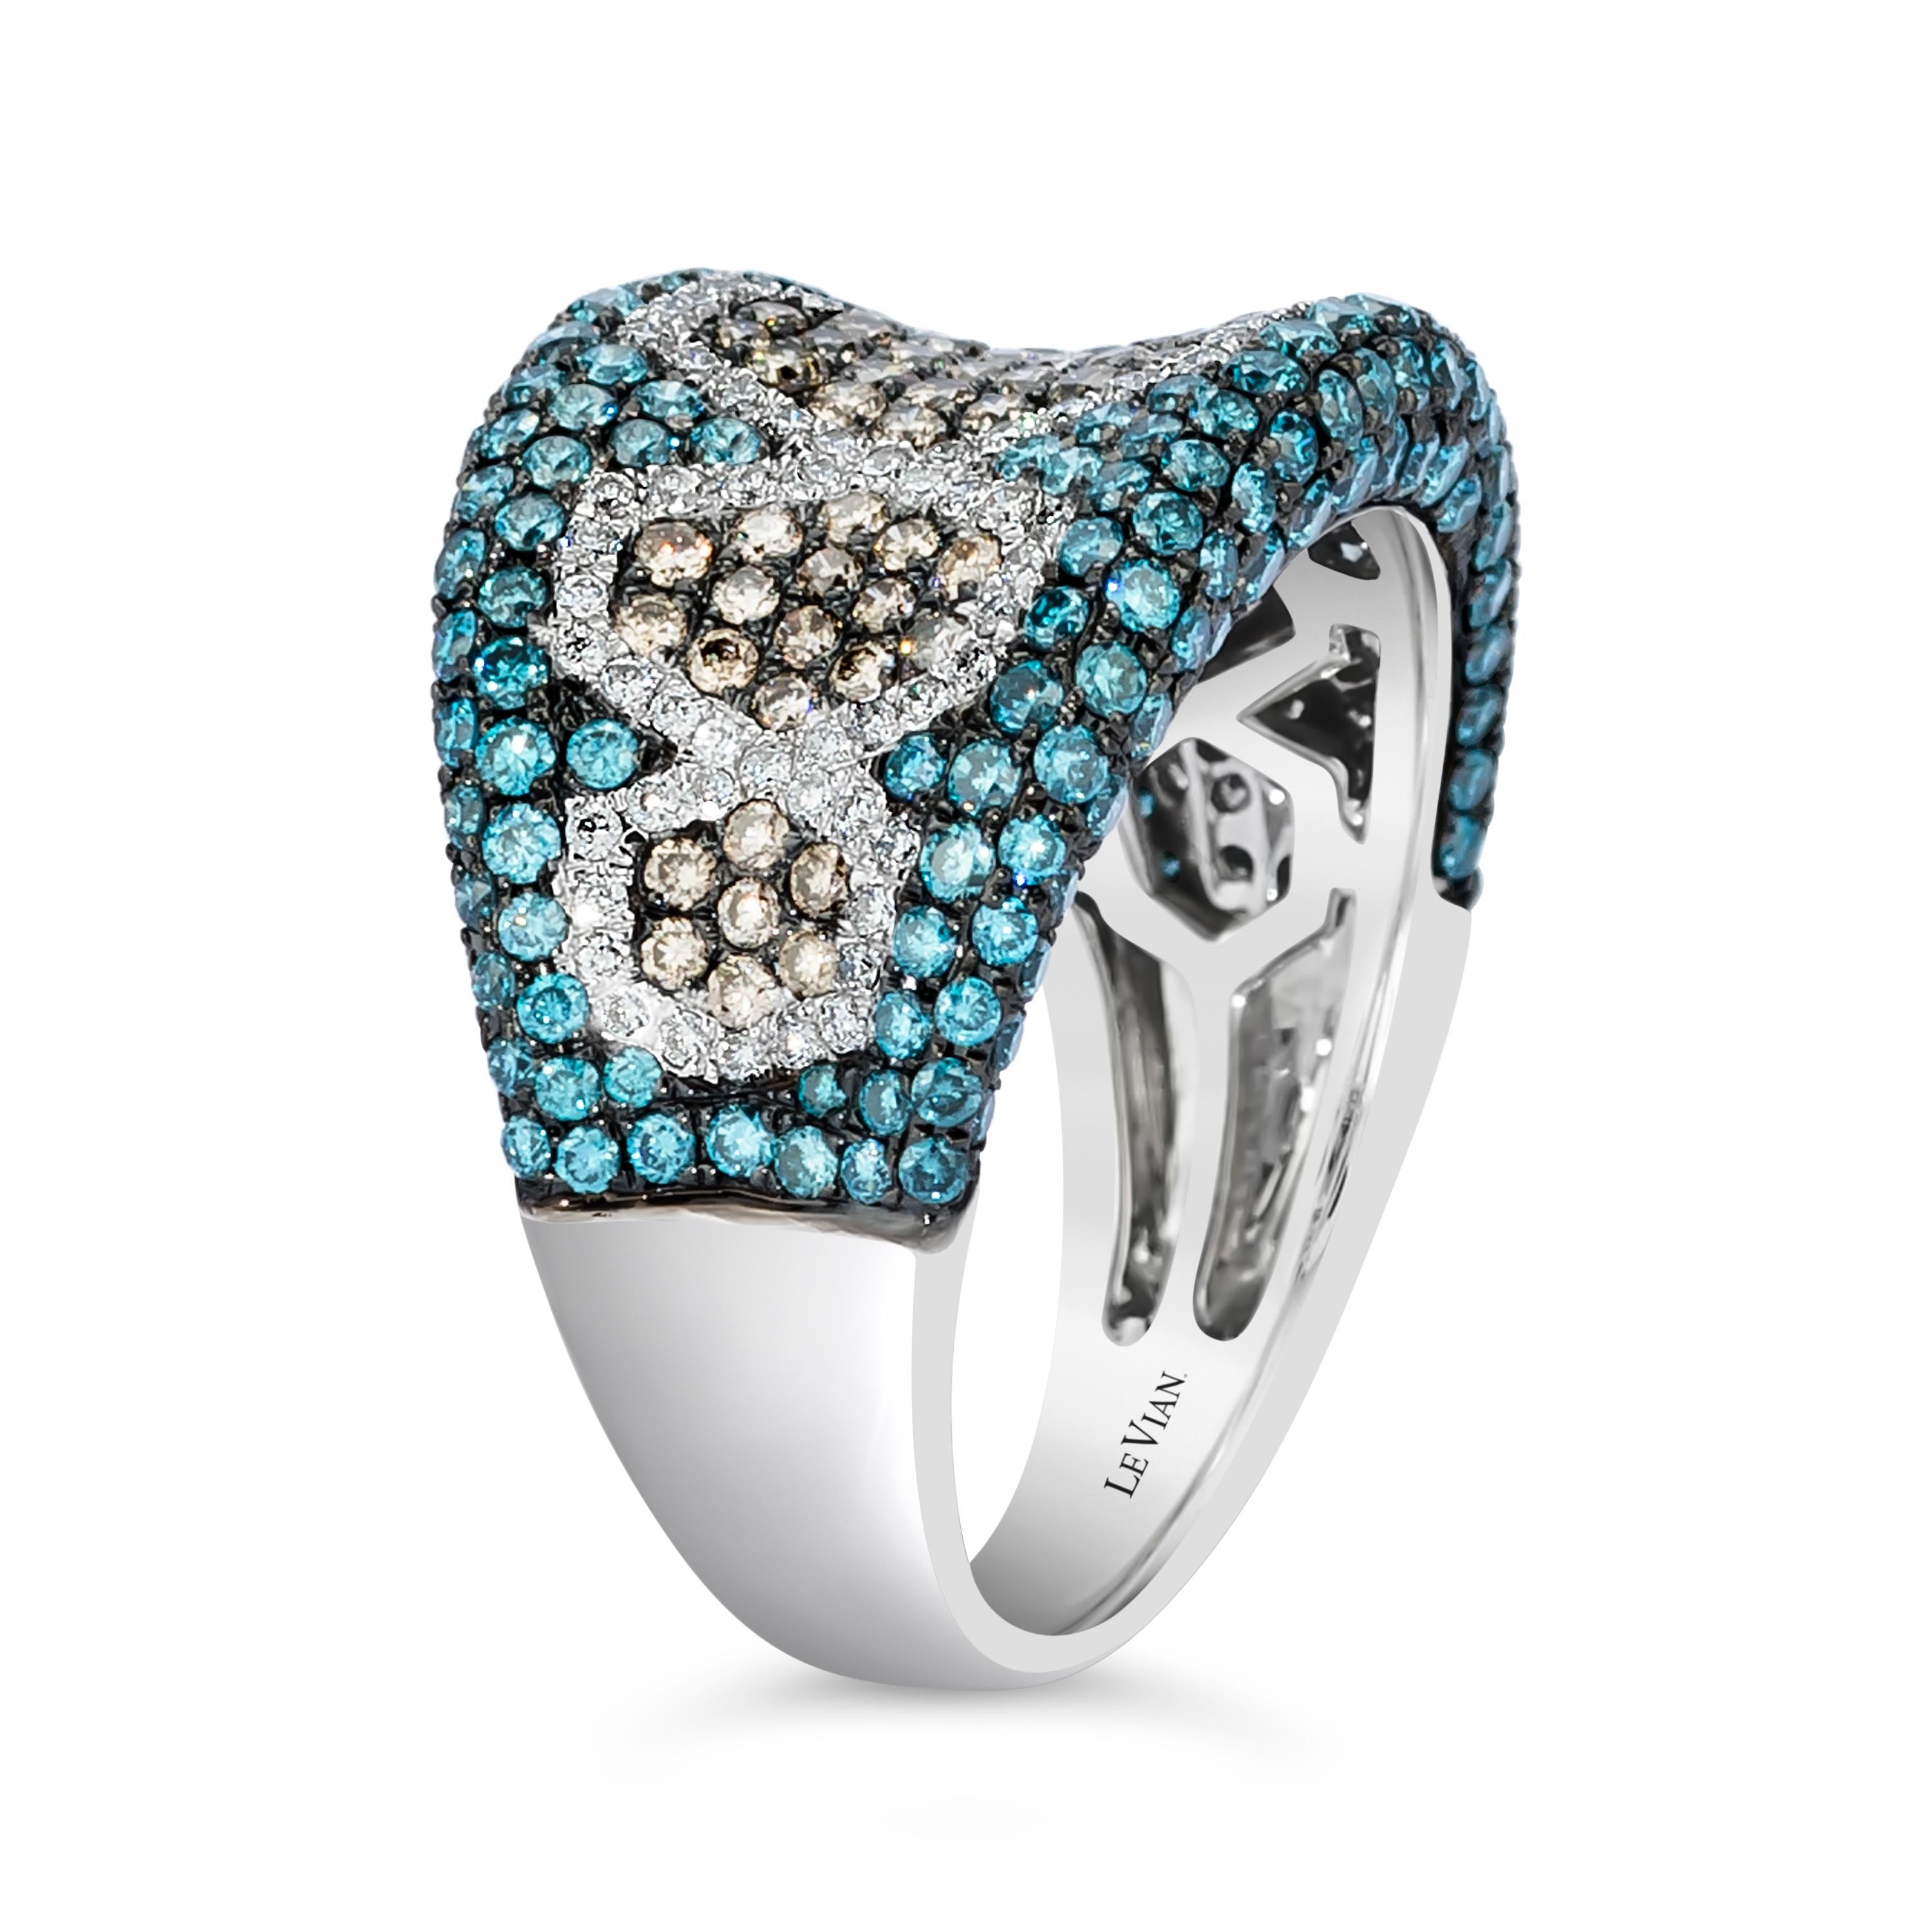 Round Cut LeVian Ring Chocolate, Blue, and White Diamonds Set in 14K White Gold For Sale